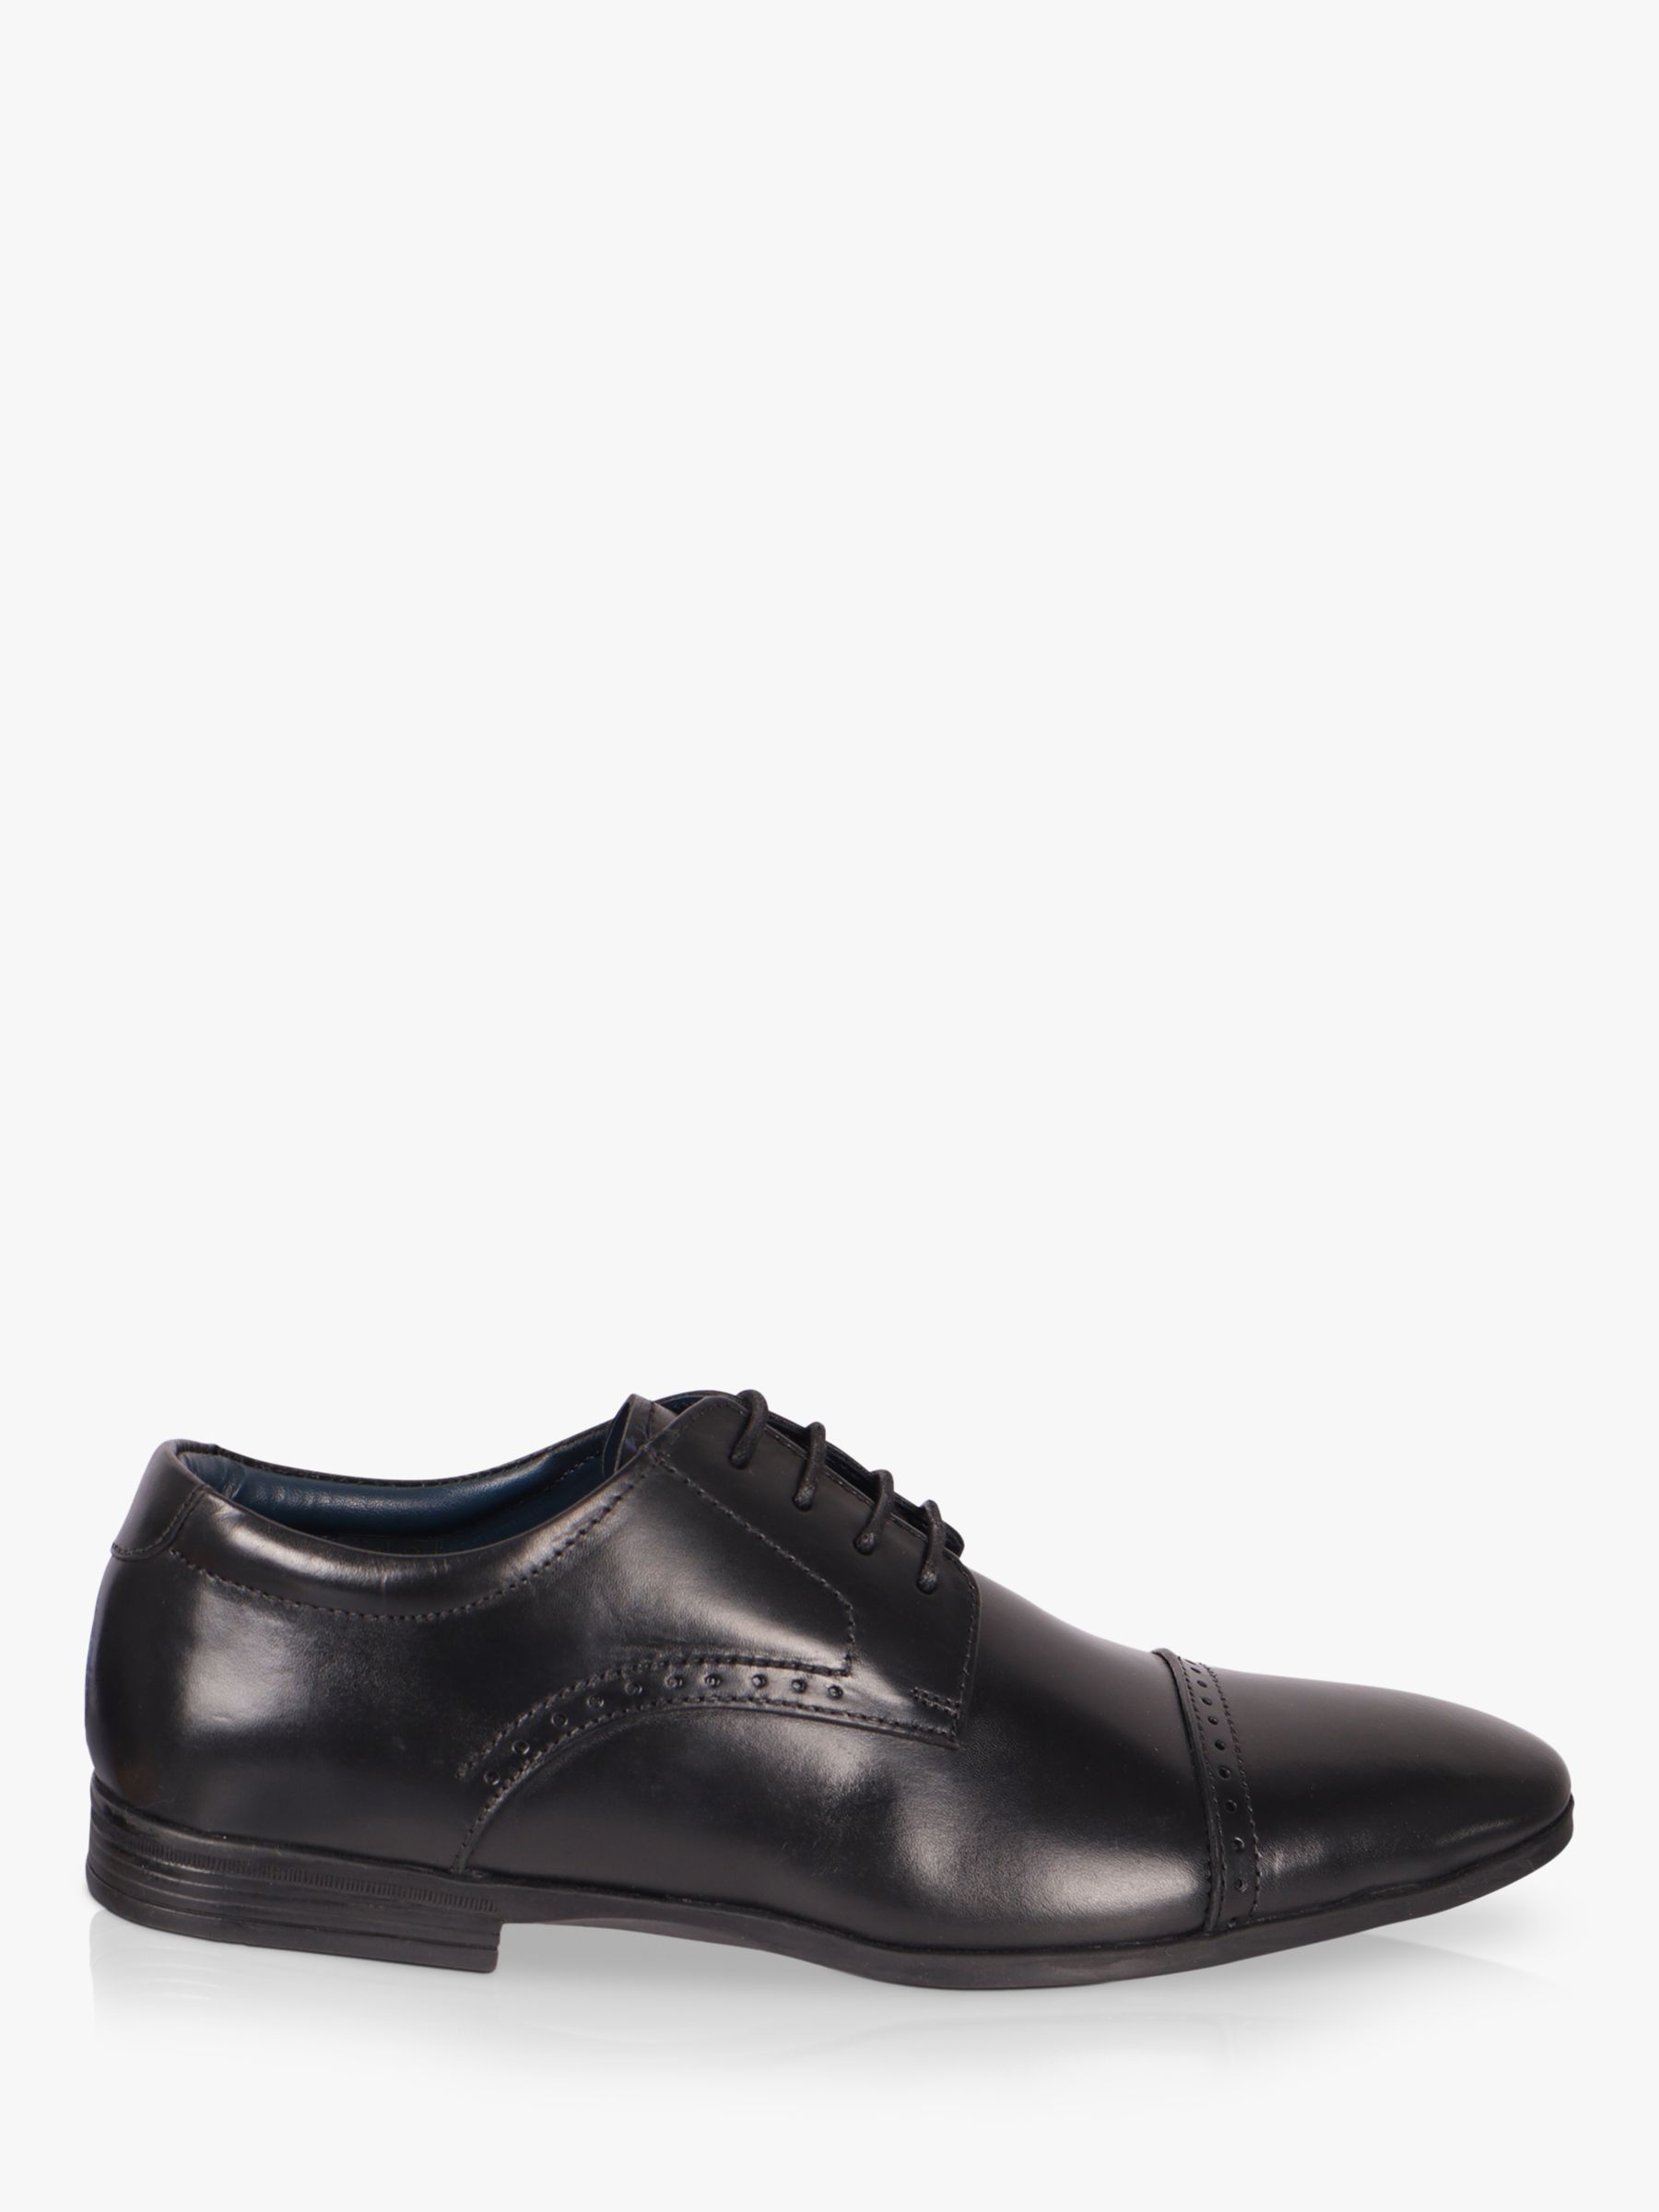 Silver Street London Lawrence Leather Brogues, Black